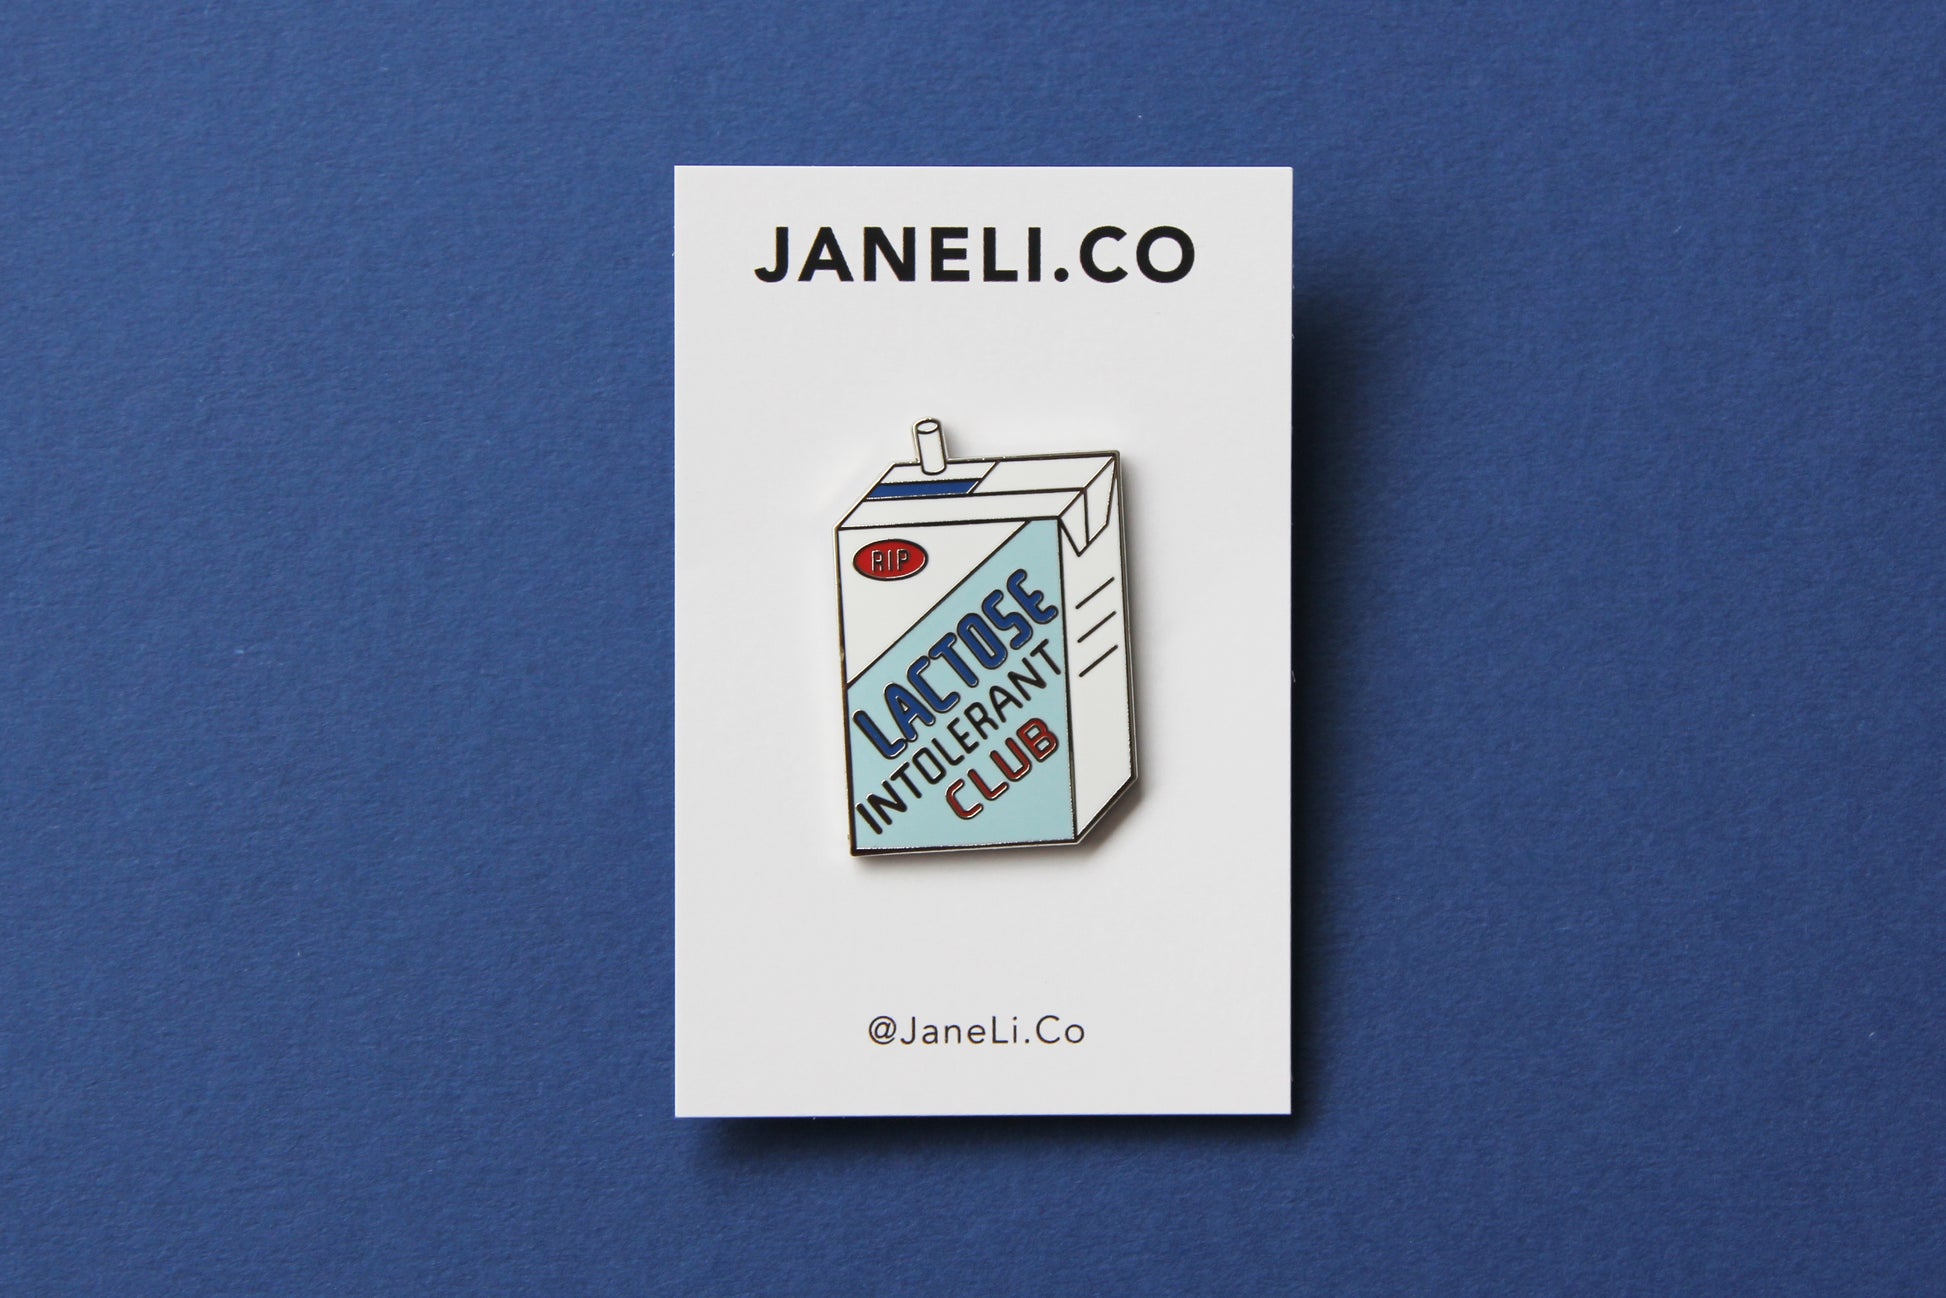 An enamel pin showing a soymilk carton that says" Lactose Intolerant Club" on a white JaneLi.Co backing card over a blue background.